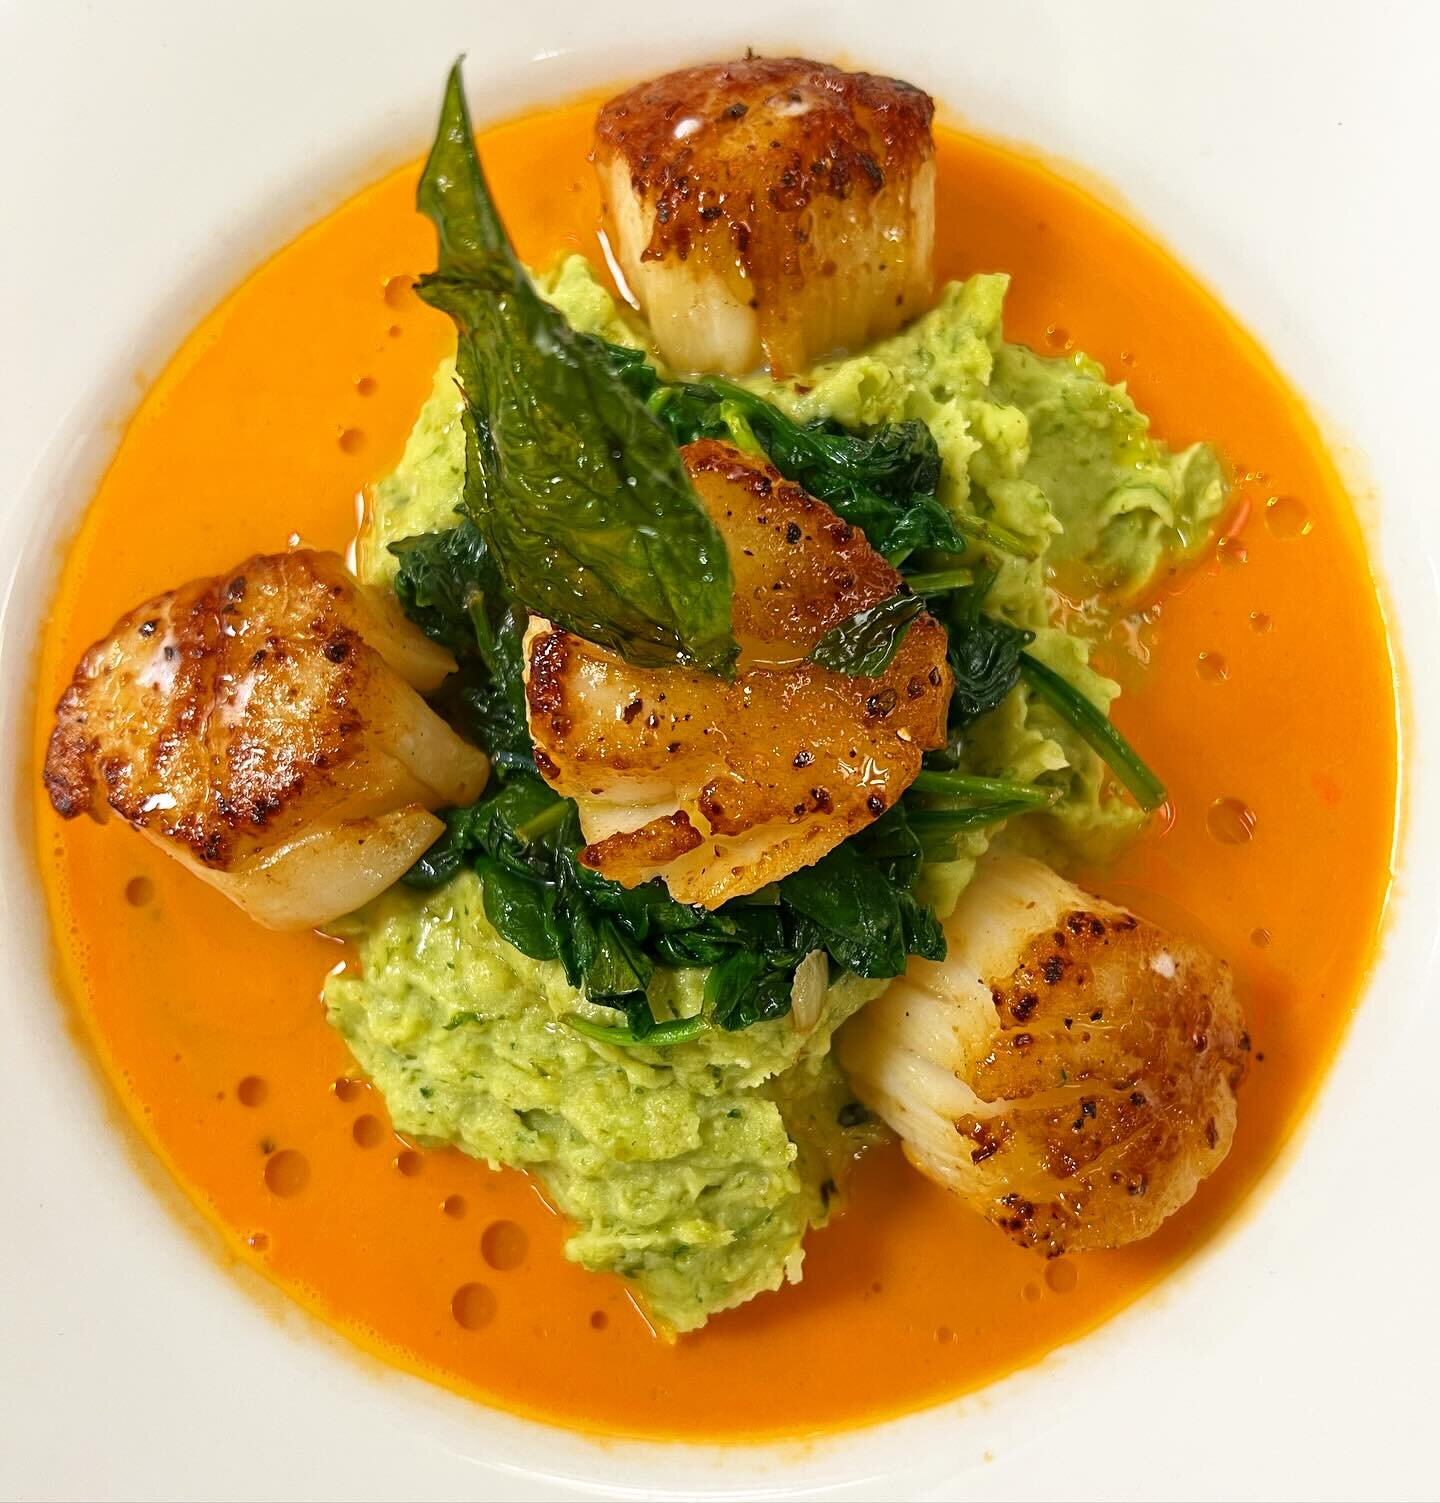 Seared sea scallops, basil mashed, saut&eacute;ed spinach, smoked red pepper broth 🤩🤤 

🌊@theclammanfalmouth 

#capecod #eatcapecod #capecodseafood #scallops #falmouth #falmouthrestaurant 
#capecodrestaurants